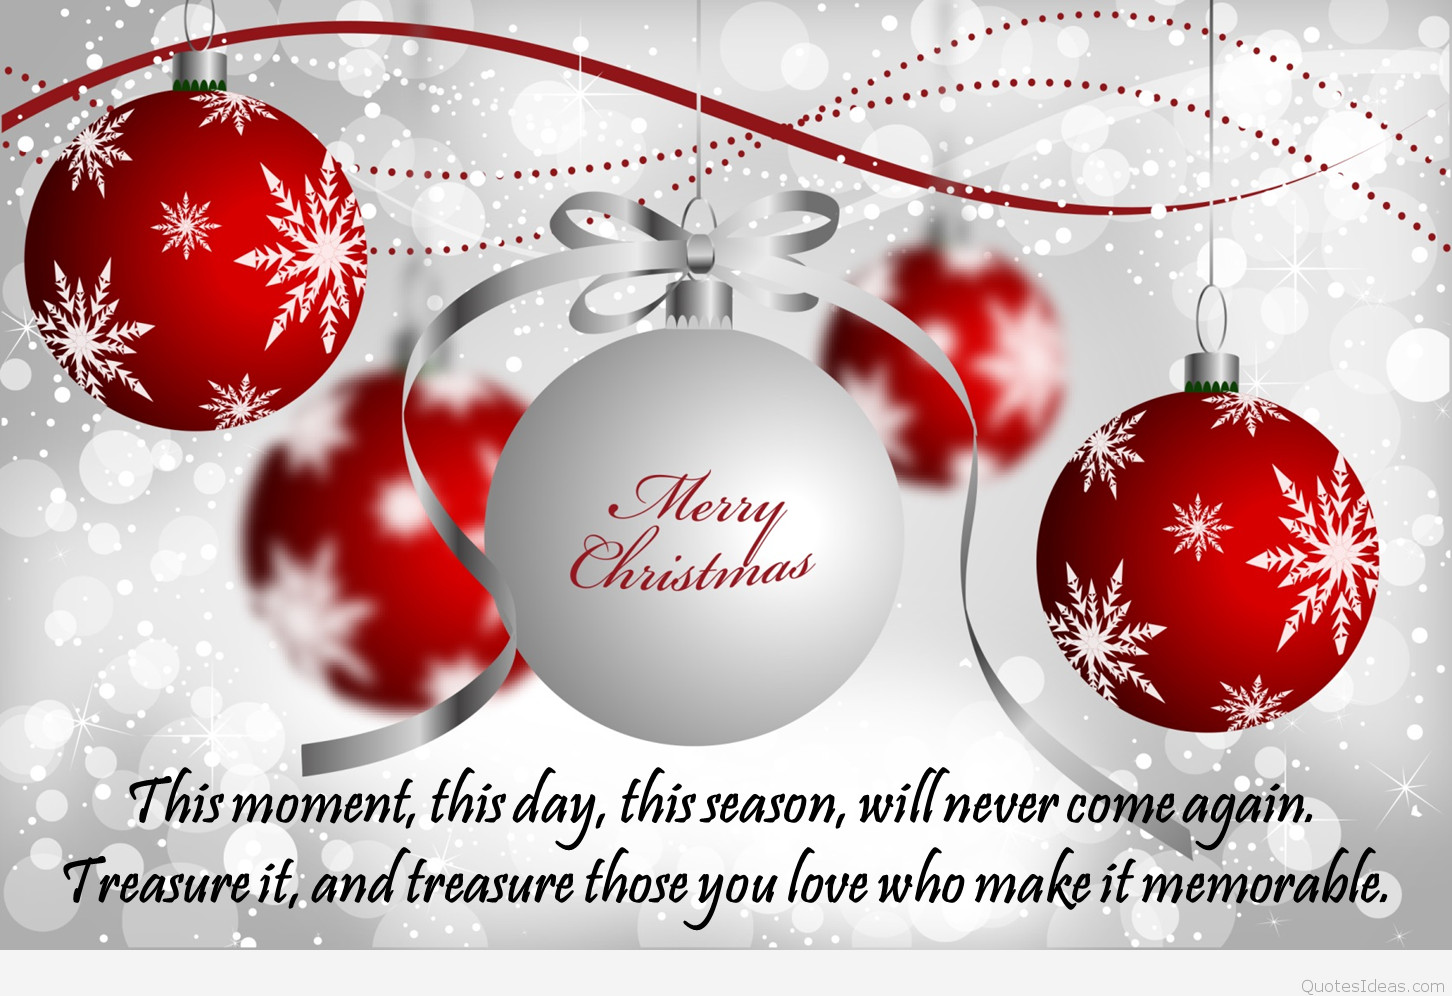 Merry Christmas Quotes And Images
 Merry Christmas quotes